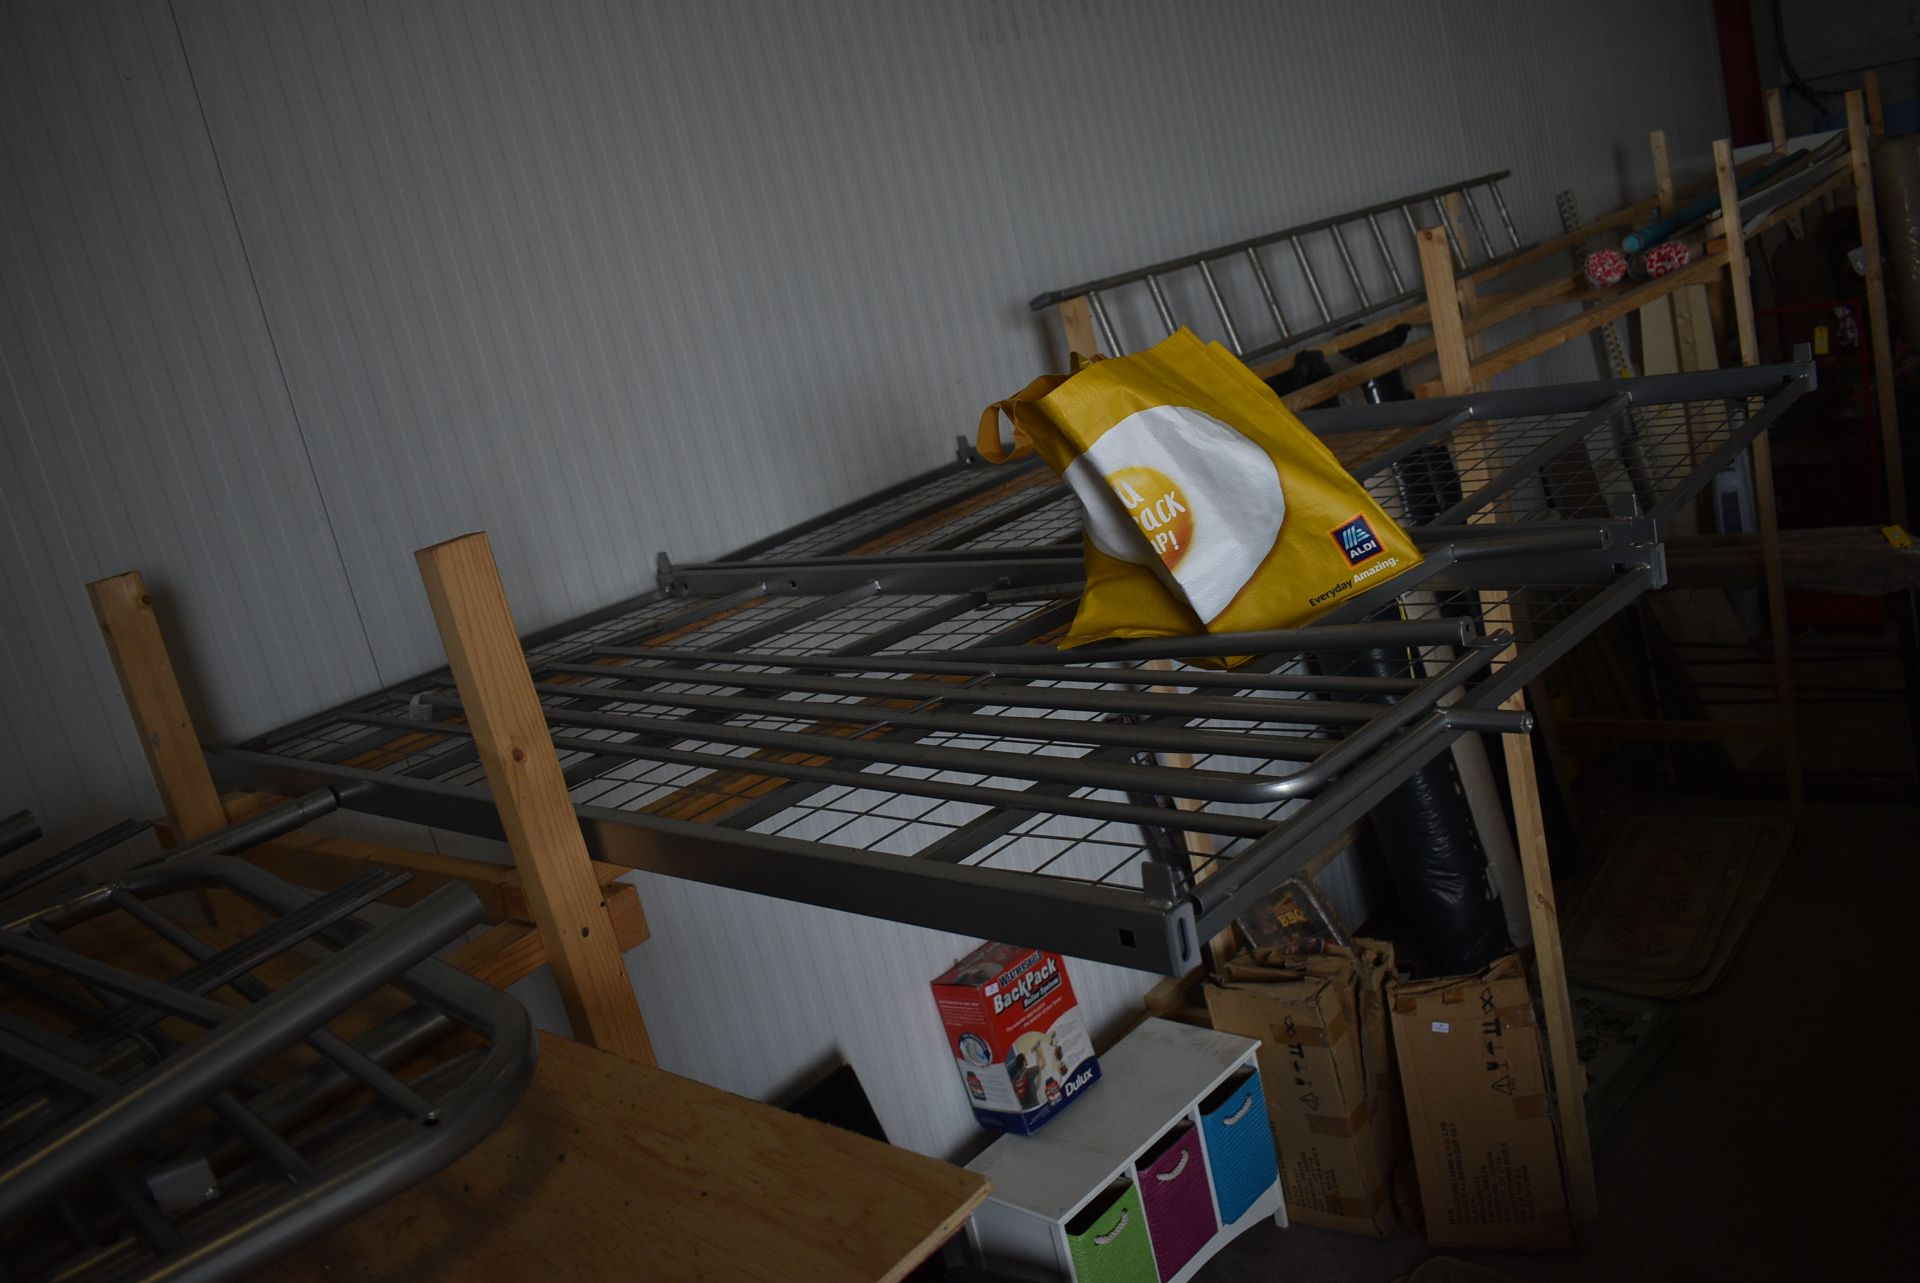 Disassembled Bunkbed - Image 4 of 4